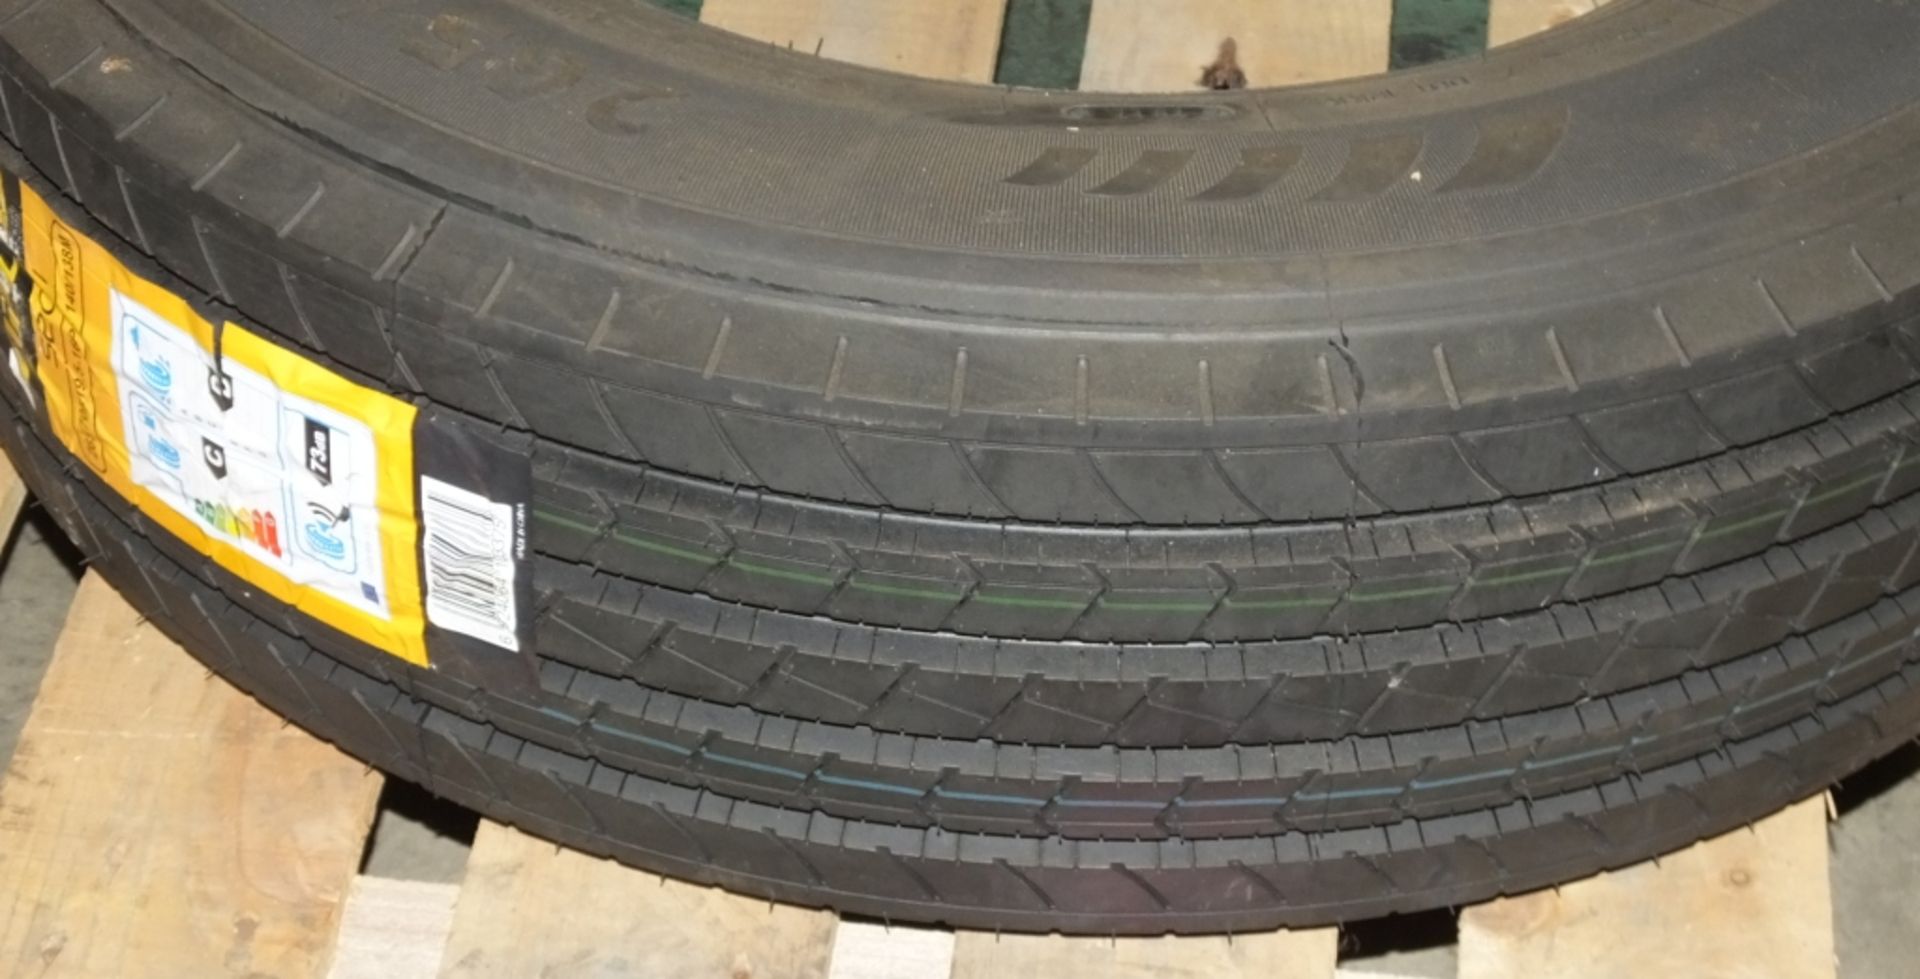 Alpus Commercial Tire - 265 / 70R 19.5 - S201 - Image 5 of 5